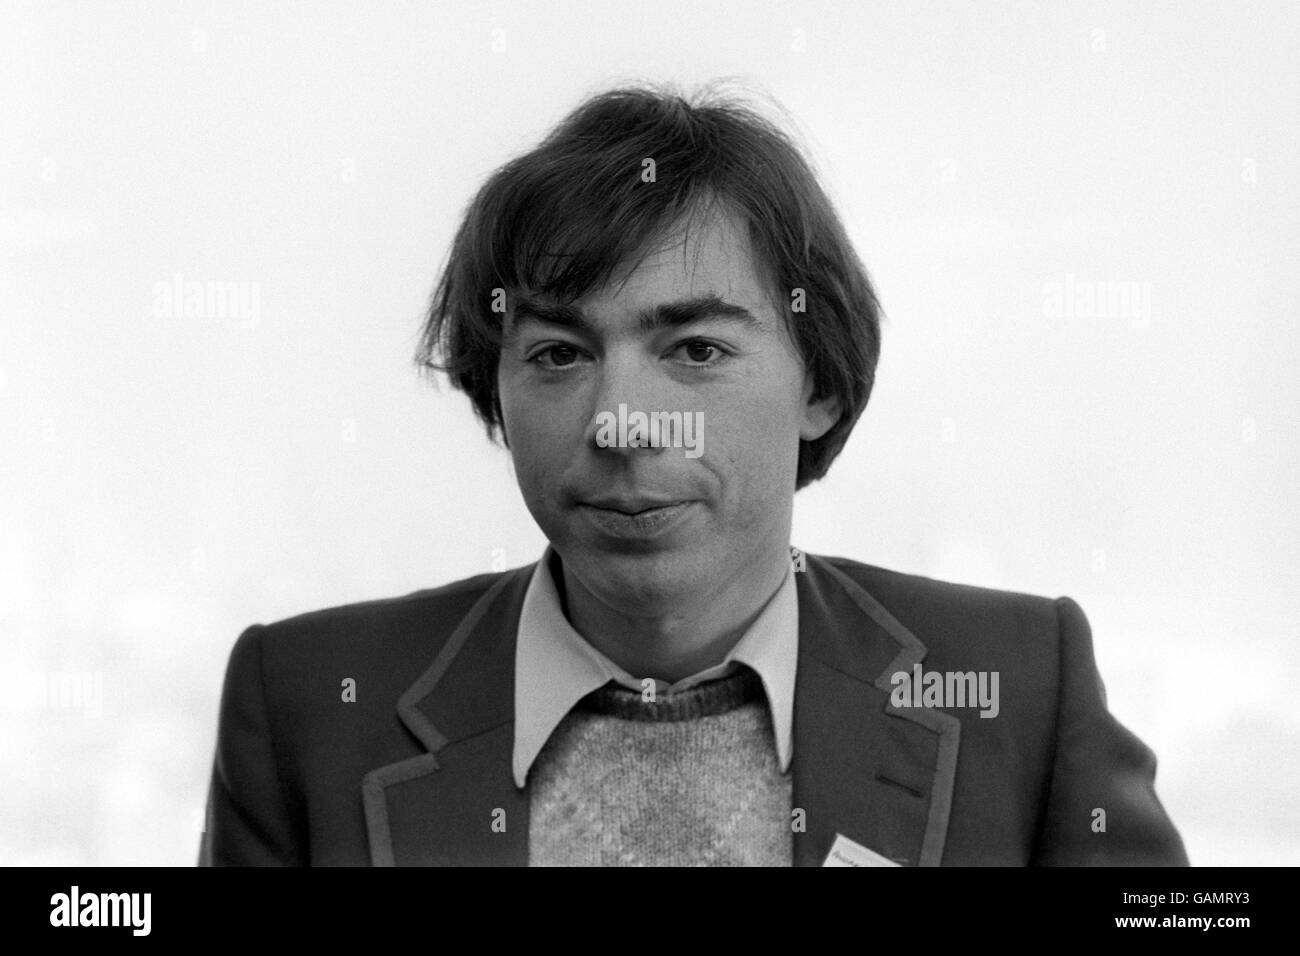 Composer Andrew Lloyd Webber after he won the Drama Awards of the Year 1981 award for the Best New Musical. Lloyd Webber won it for Cats, based on the poems of T.S Eliot. Stock Photo